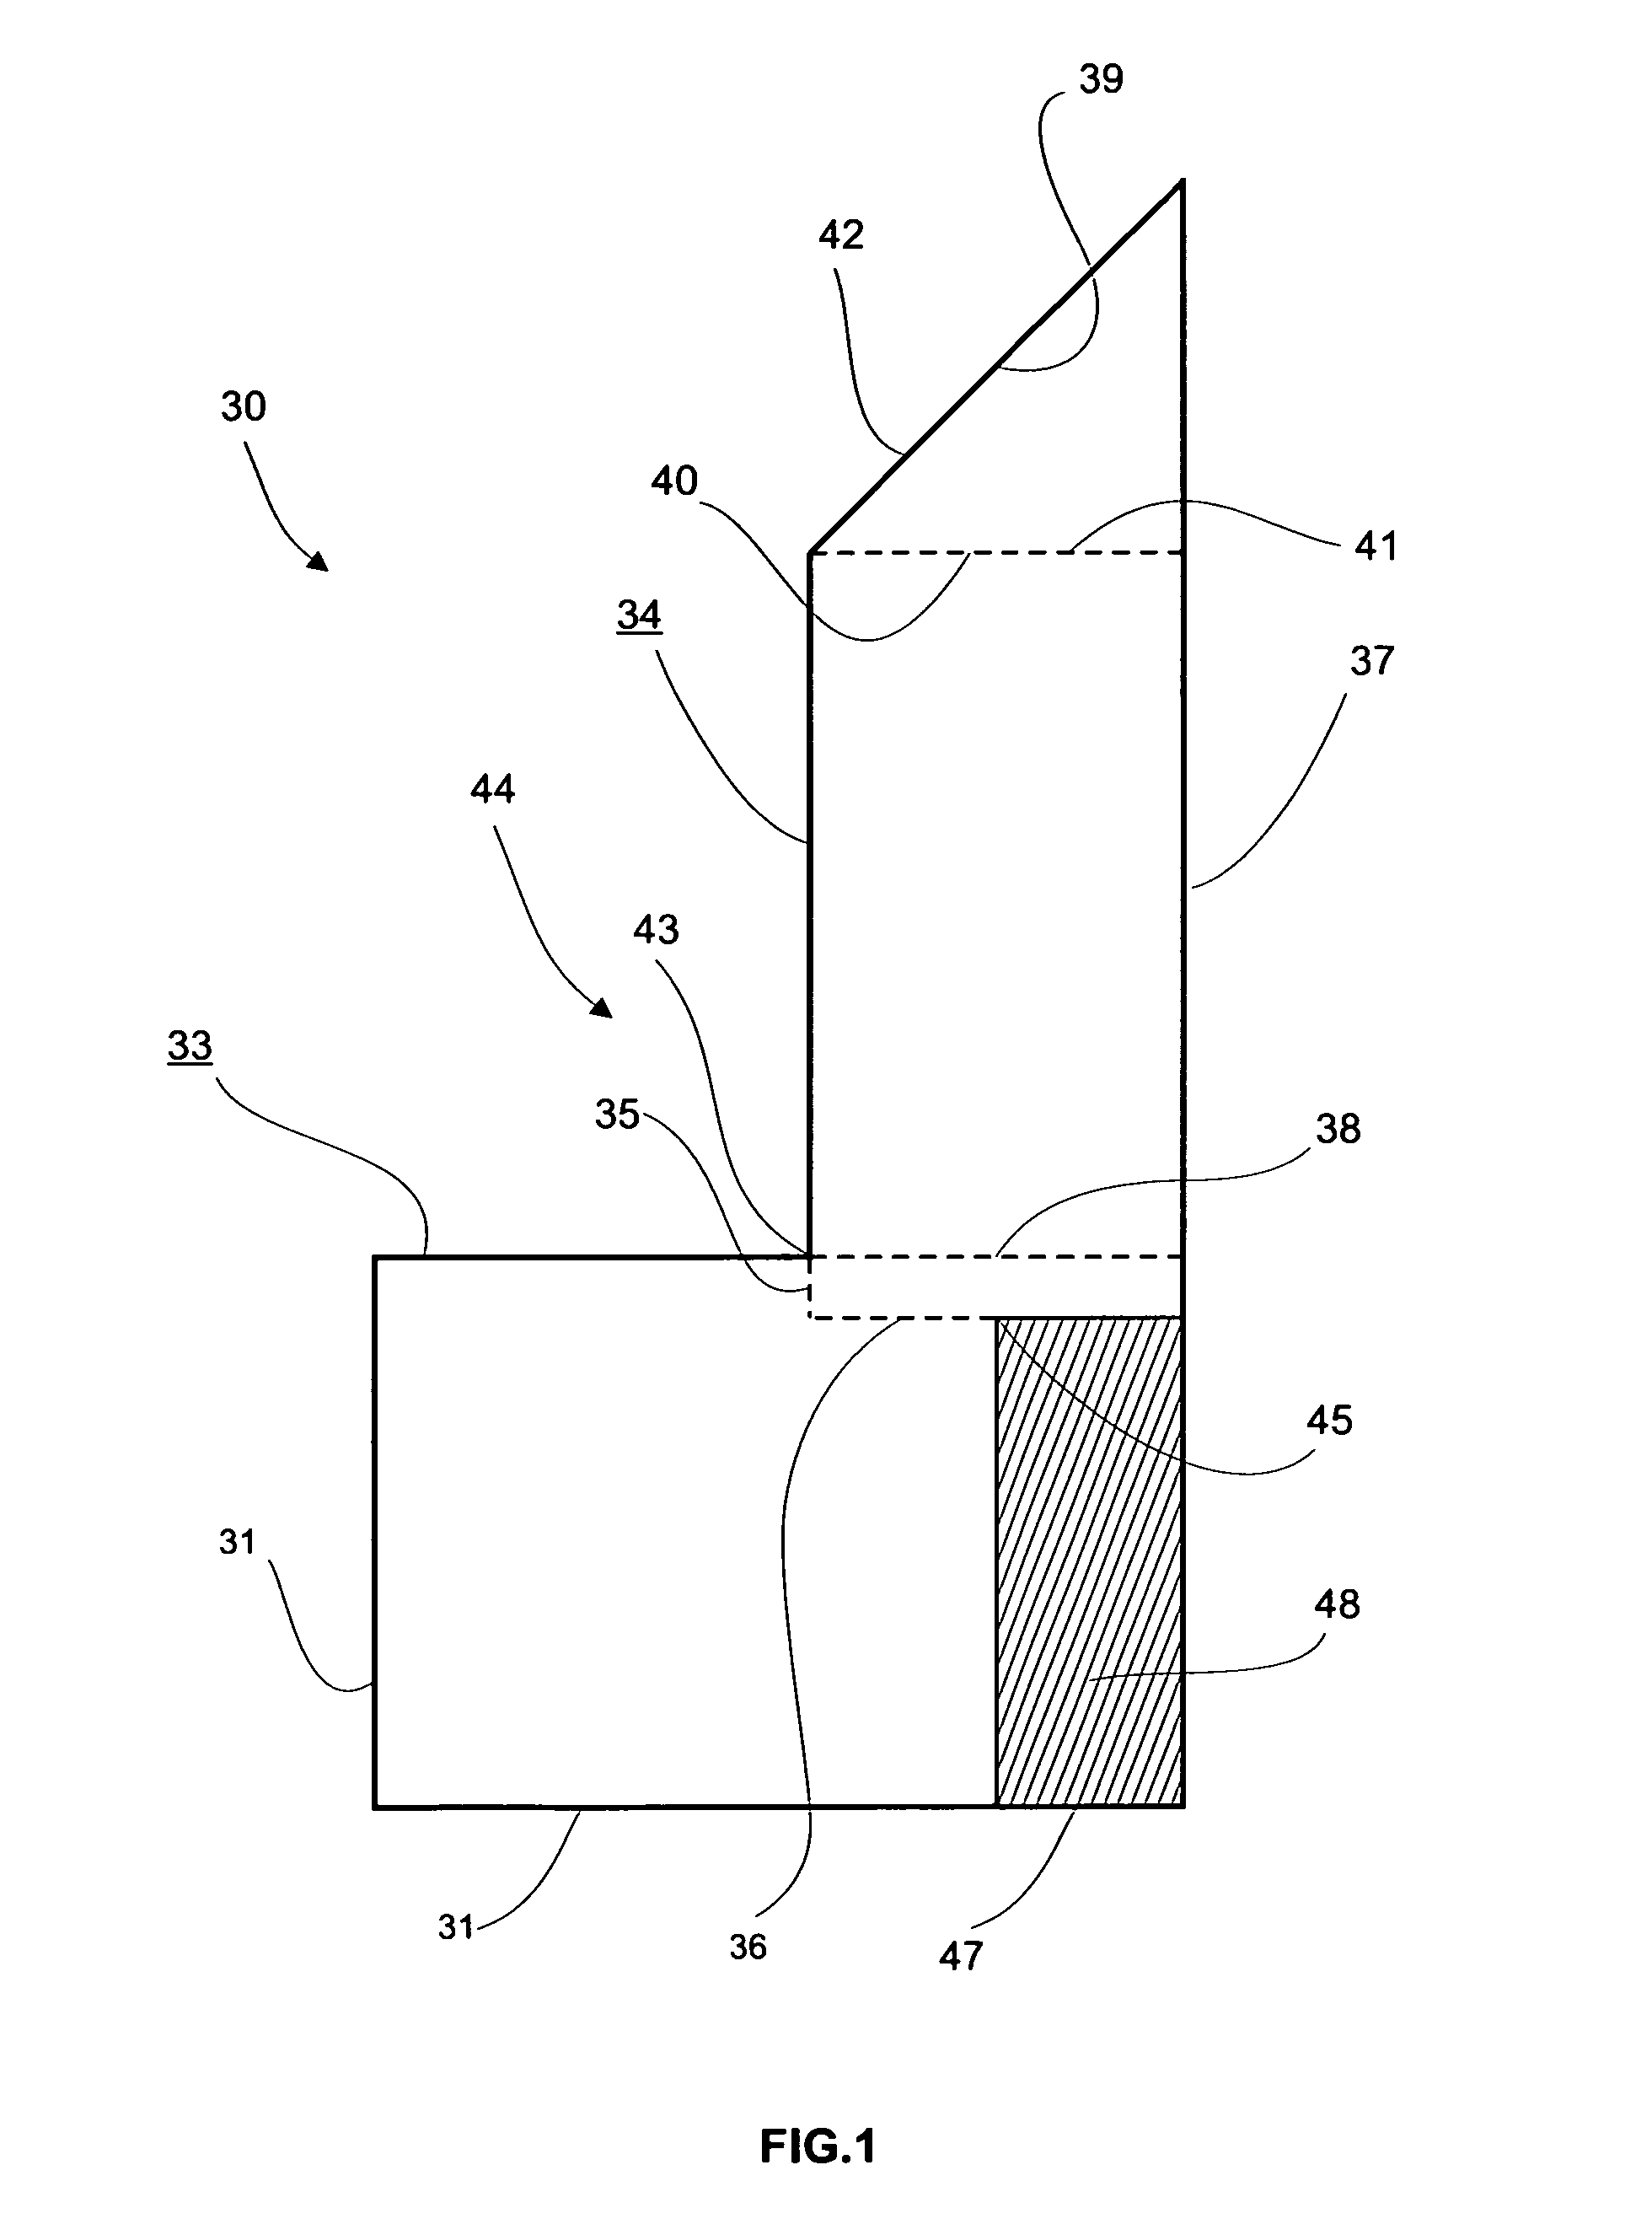 Portable stand for music instruments and method of using same